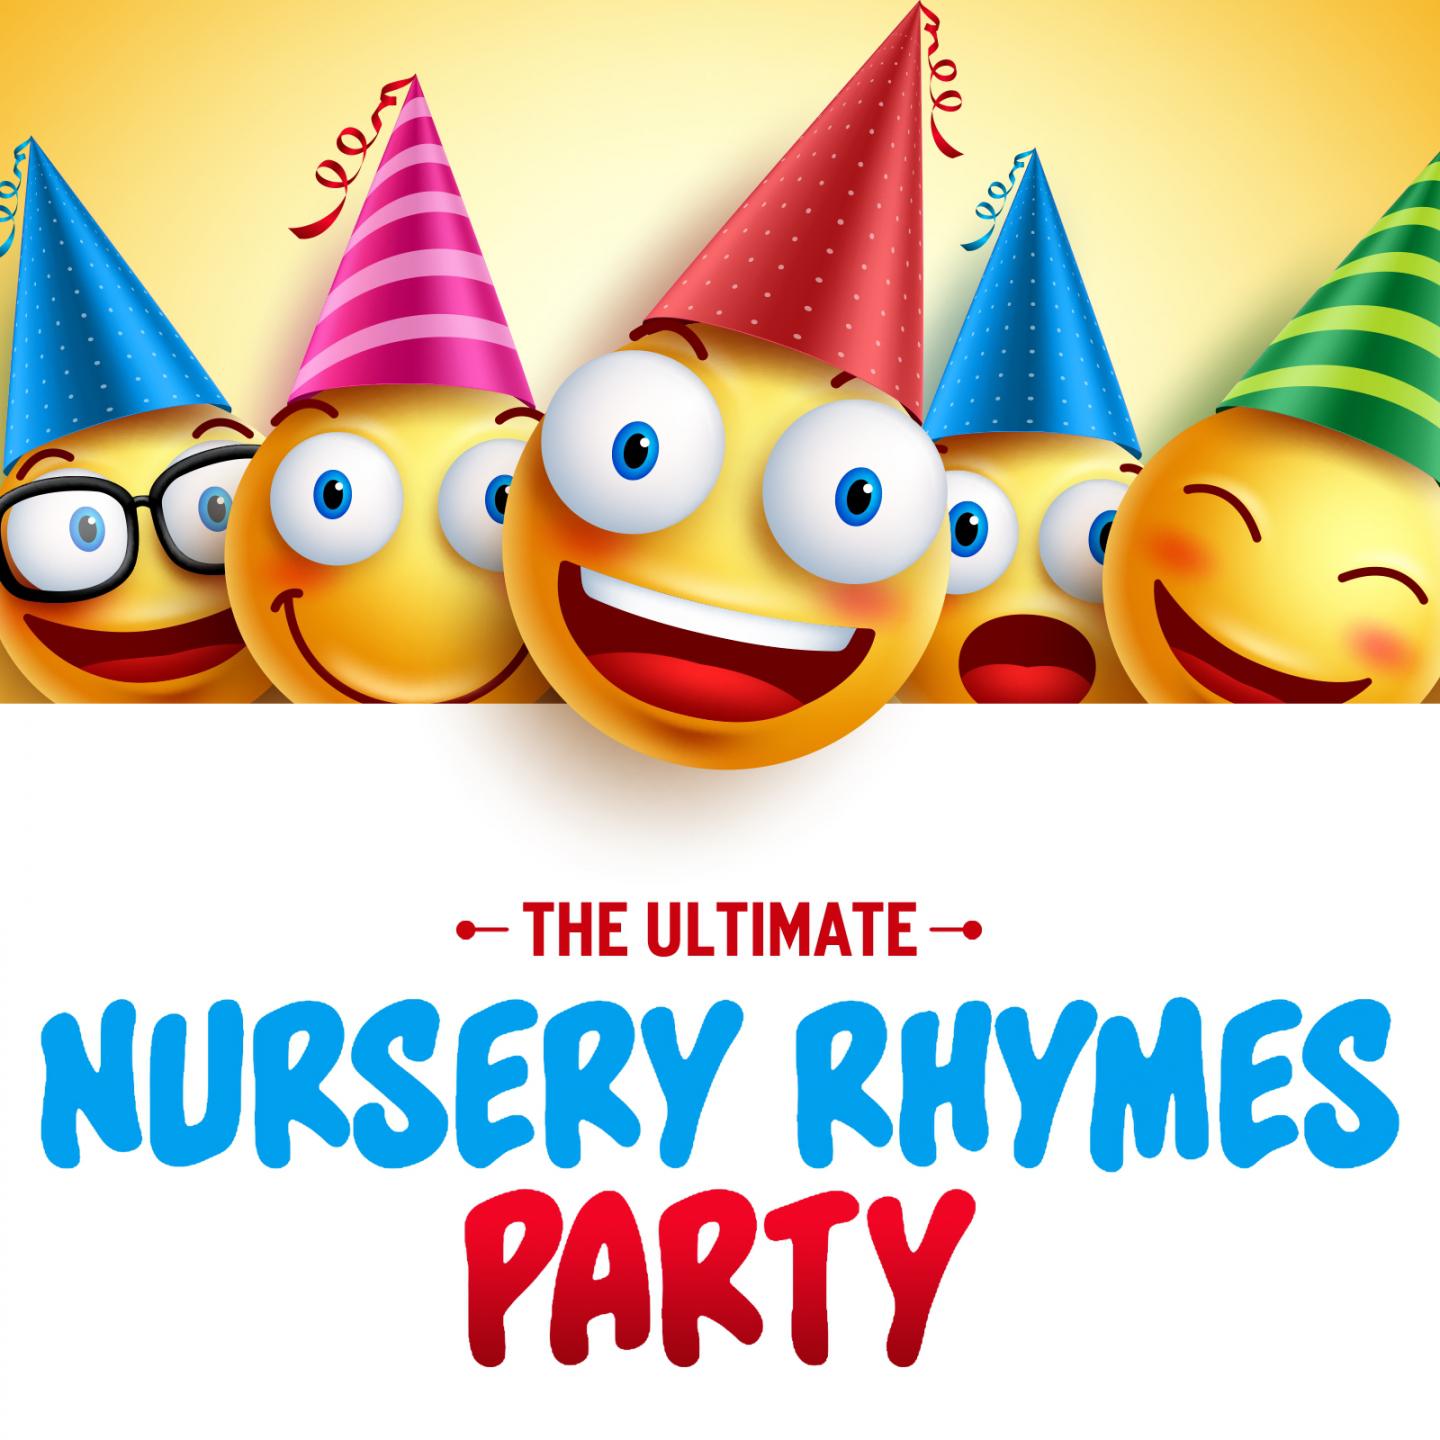 The Ultimate Nursery Rhymes Party